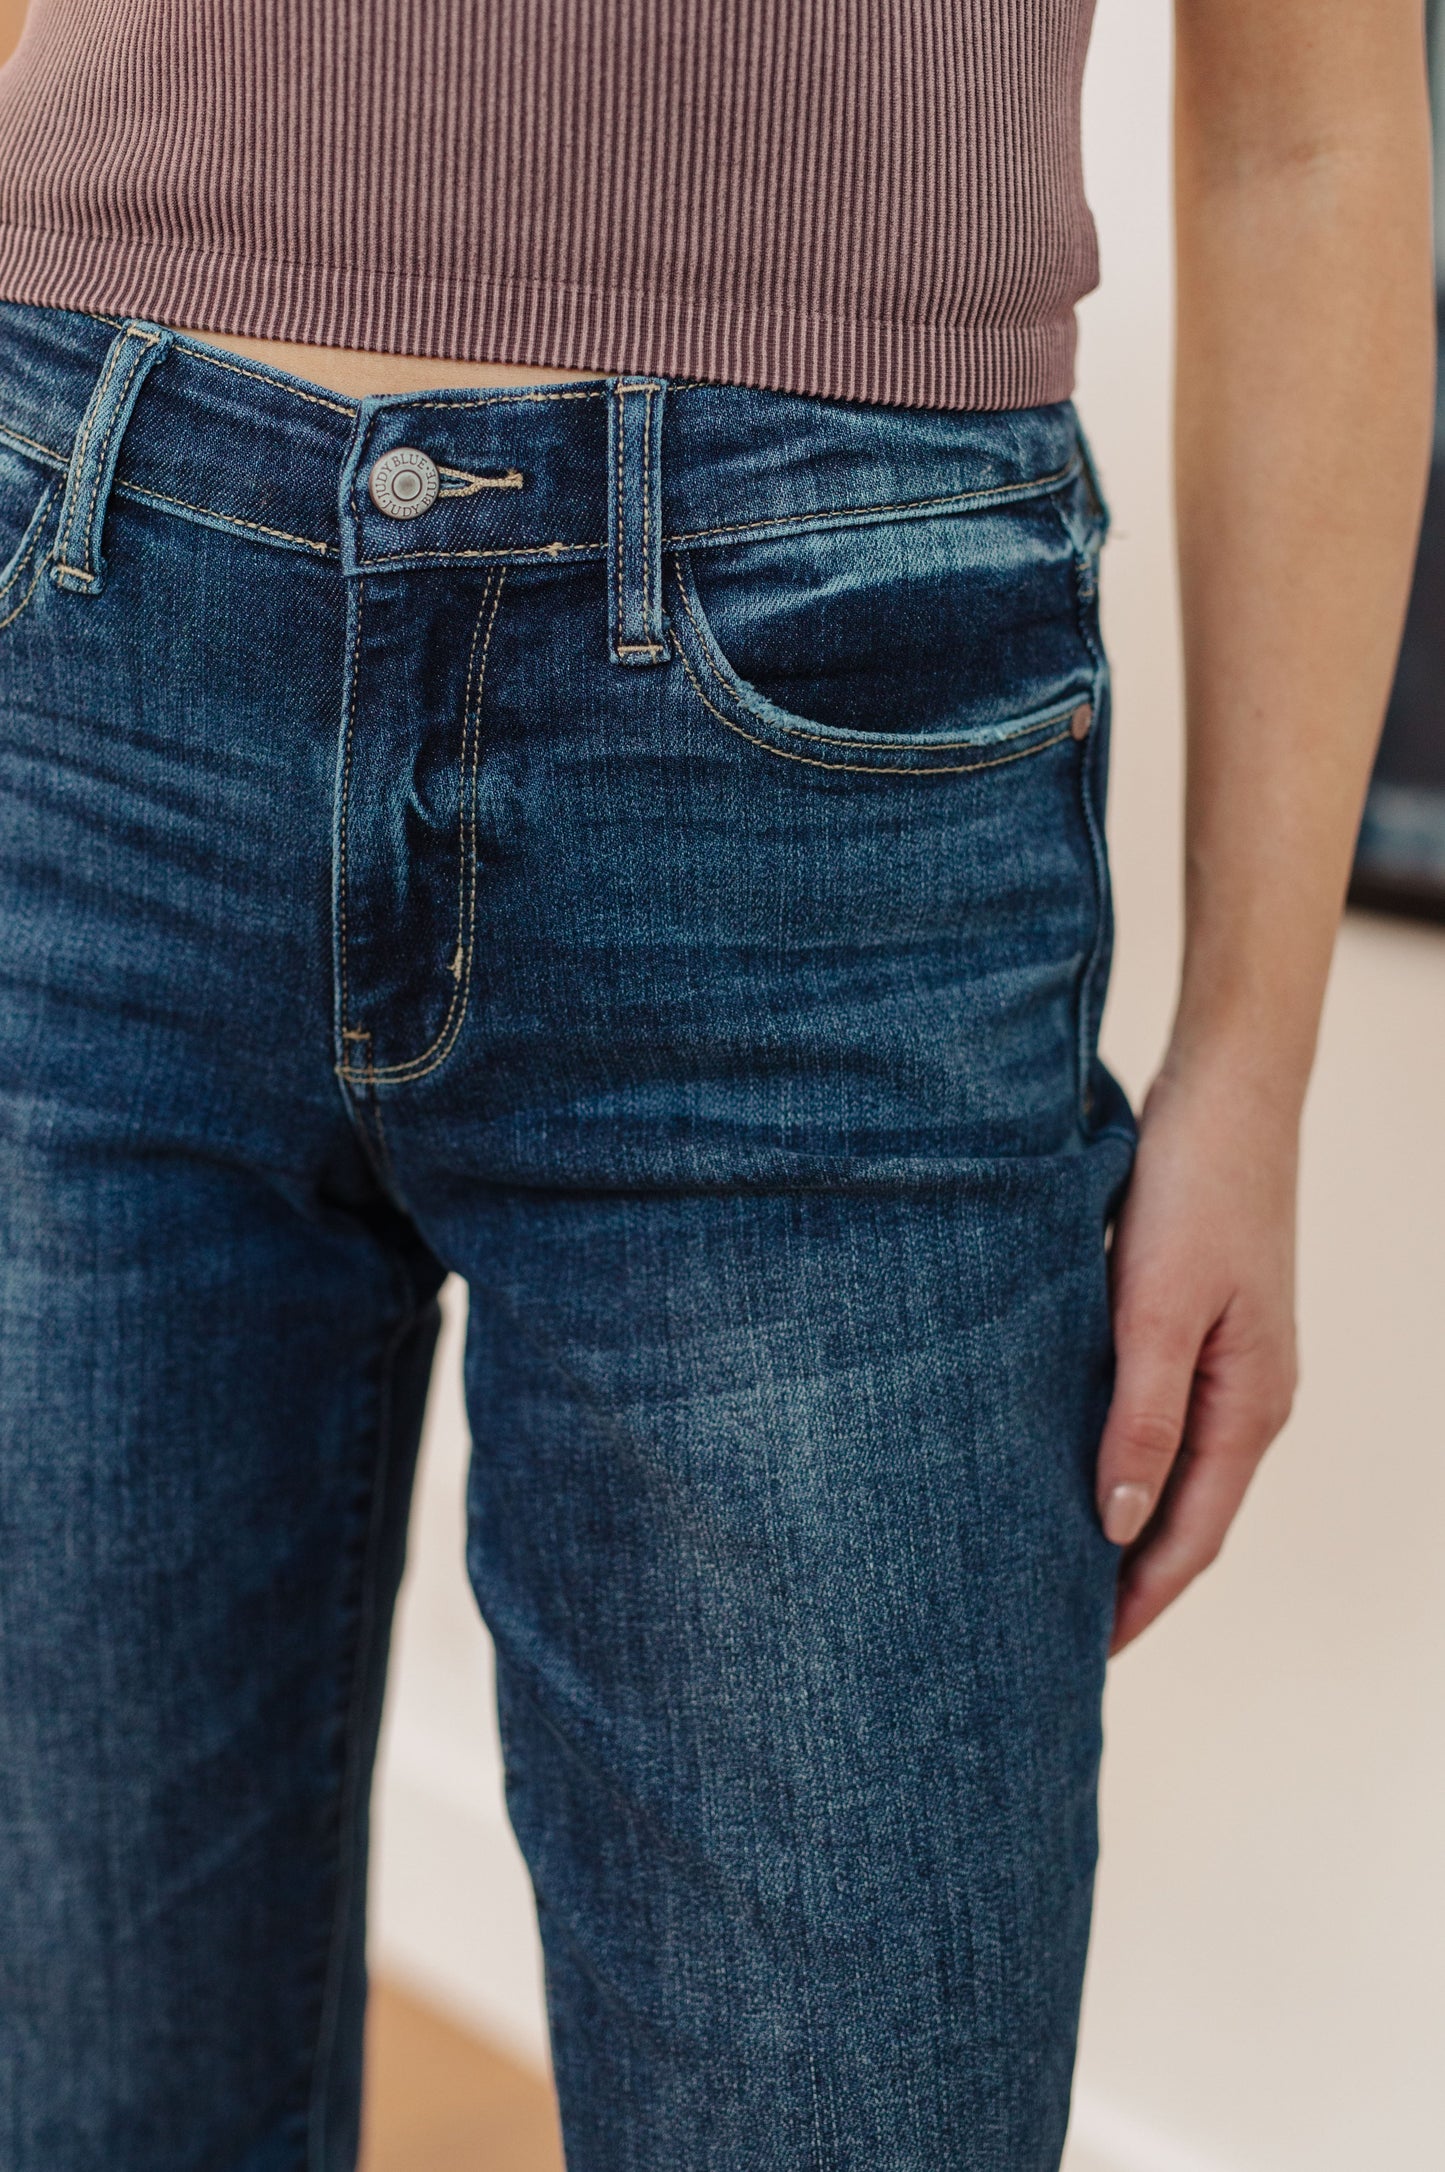 The London Boyfriend Jeans are your go to for any event life throws at ya! Made from a stretchy medium wash denim, it's hard to go wrong. Featuring a mid-rise waist with a five pocket cut, zipper fly and a loose fit-slightly tapered leg that cuffs, these classic jeans are going to become a closet staple.